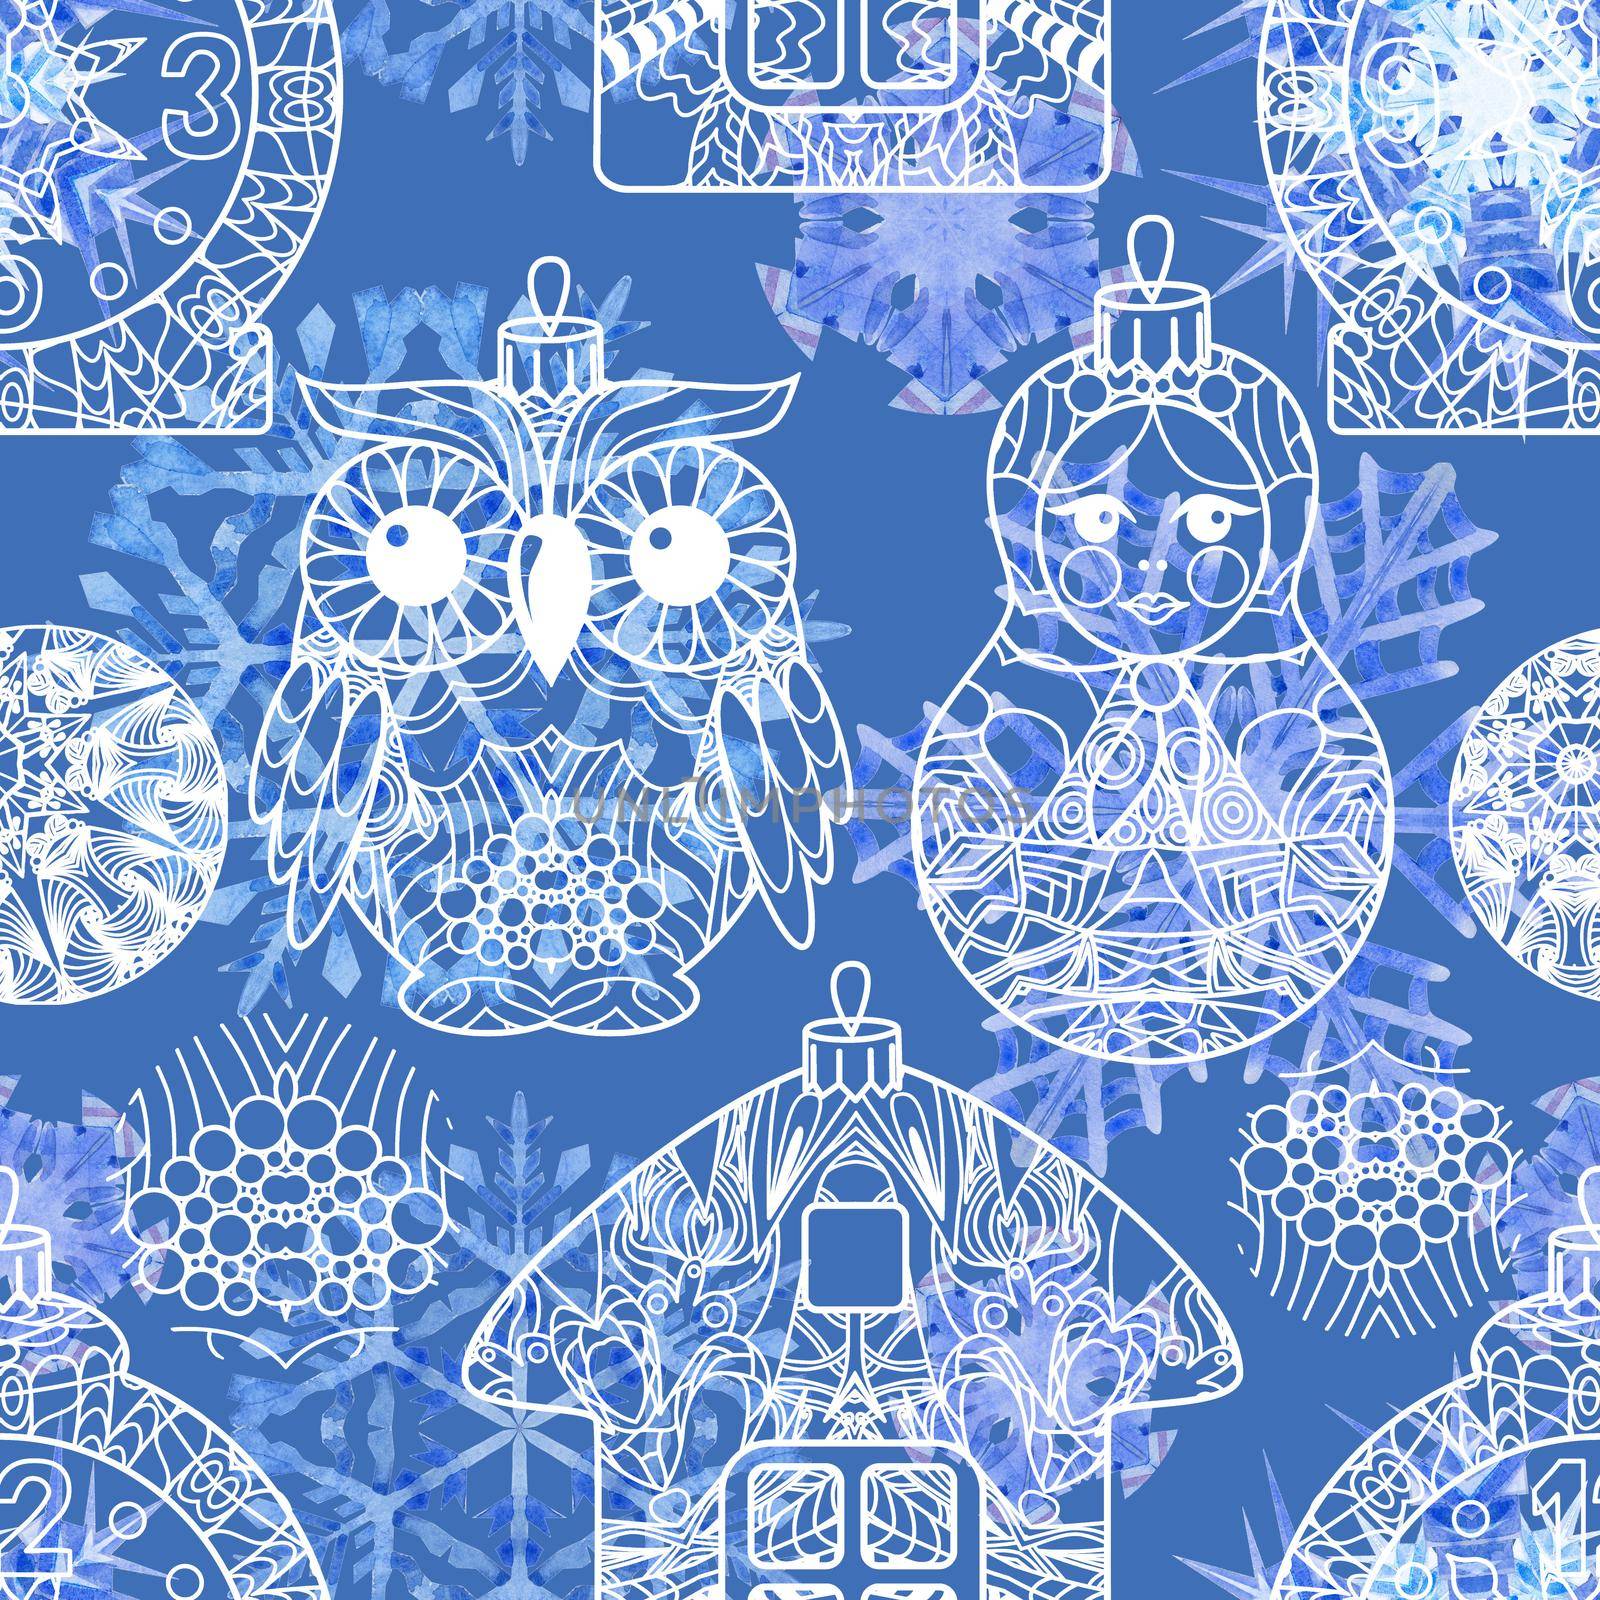 Watercolor painting effect. Handmade drawing. Seamless pattern with snowflakes, doodles and dots in blue and white colors on light blue background. For the Christmas design and decoration